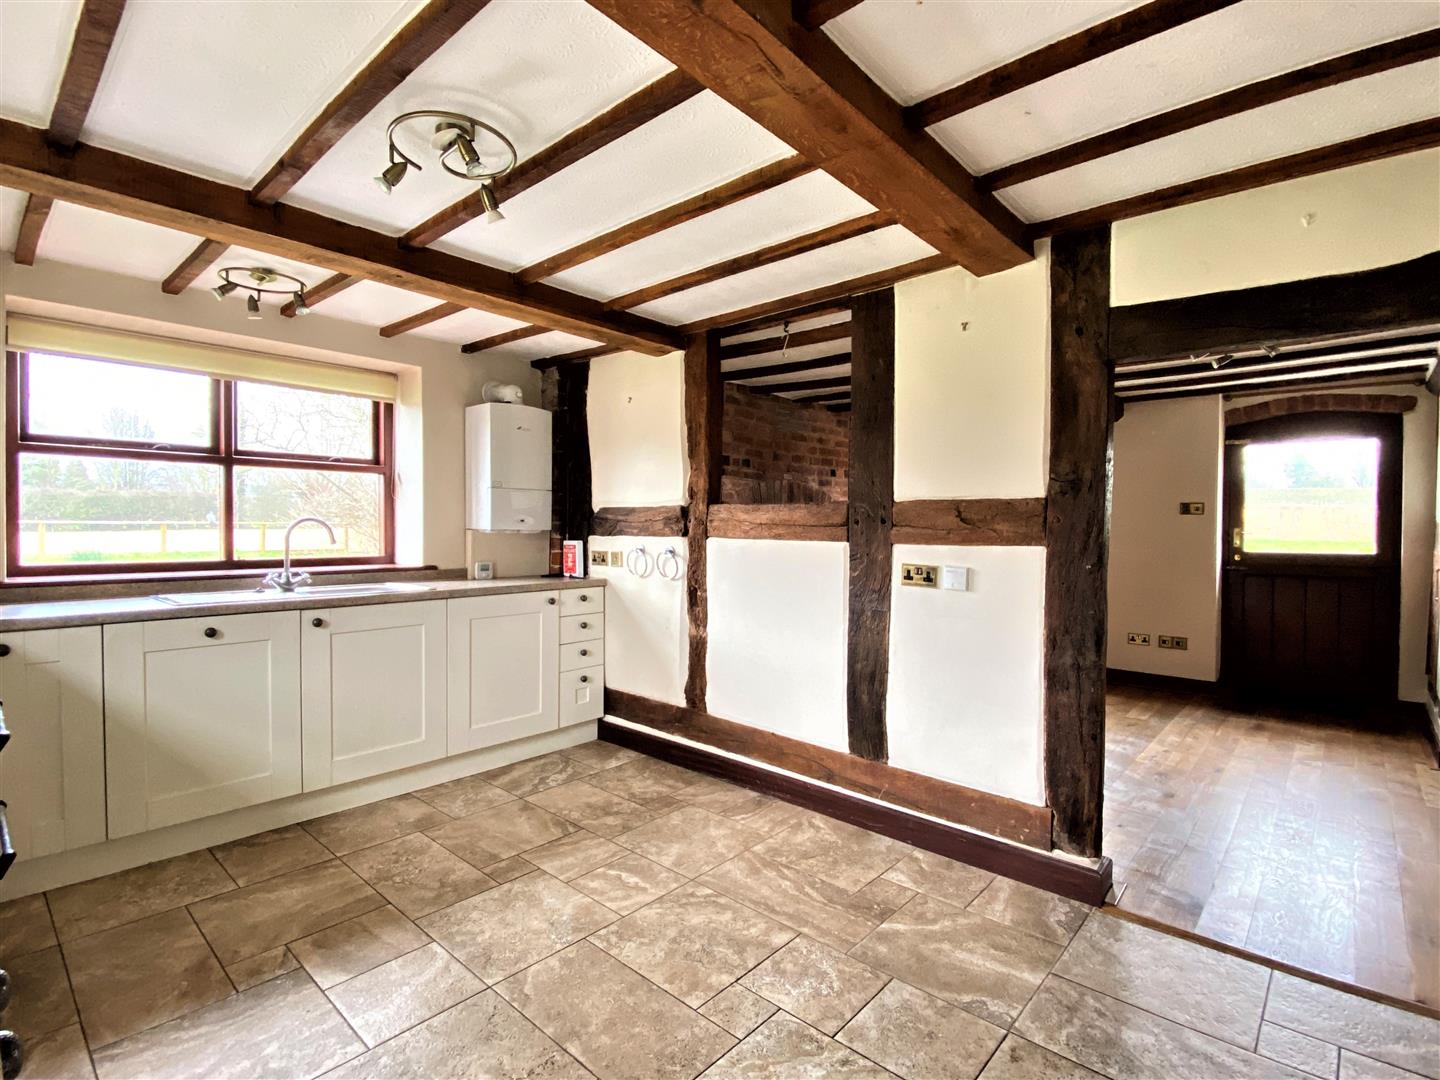 3 bed detached for sale in Bodenham  - Property Image 7